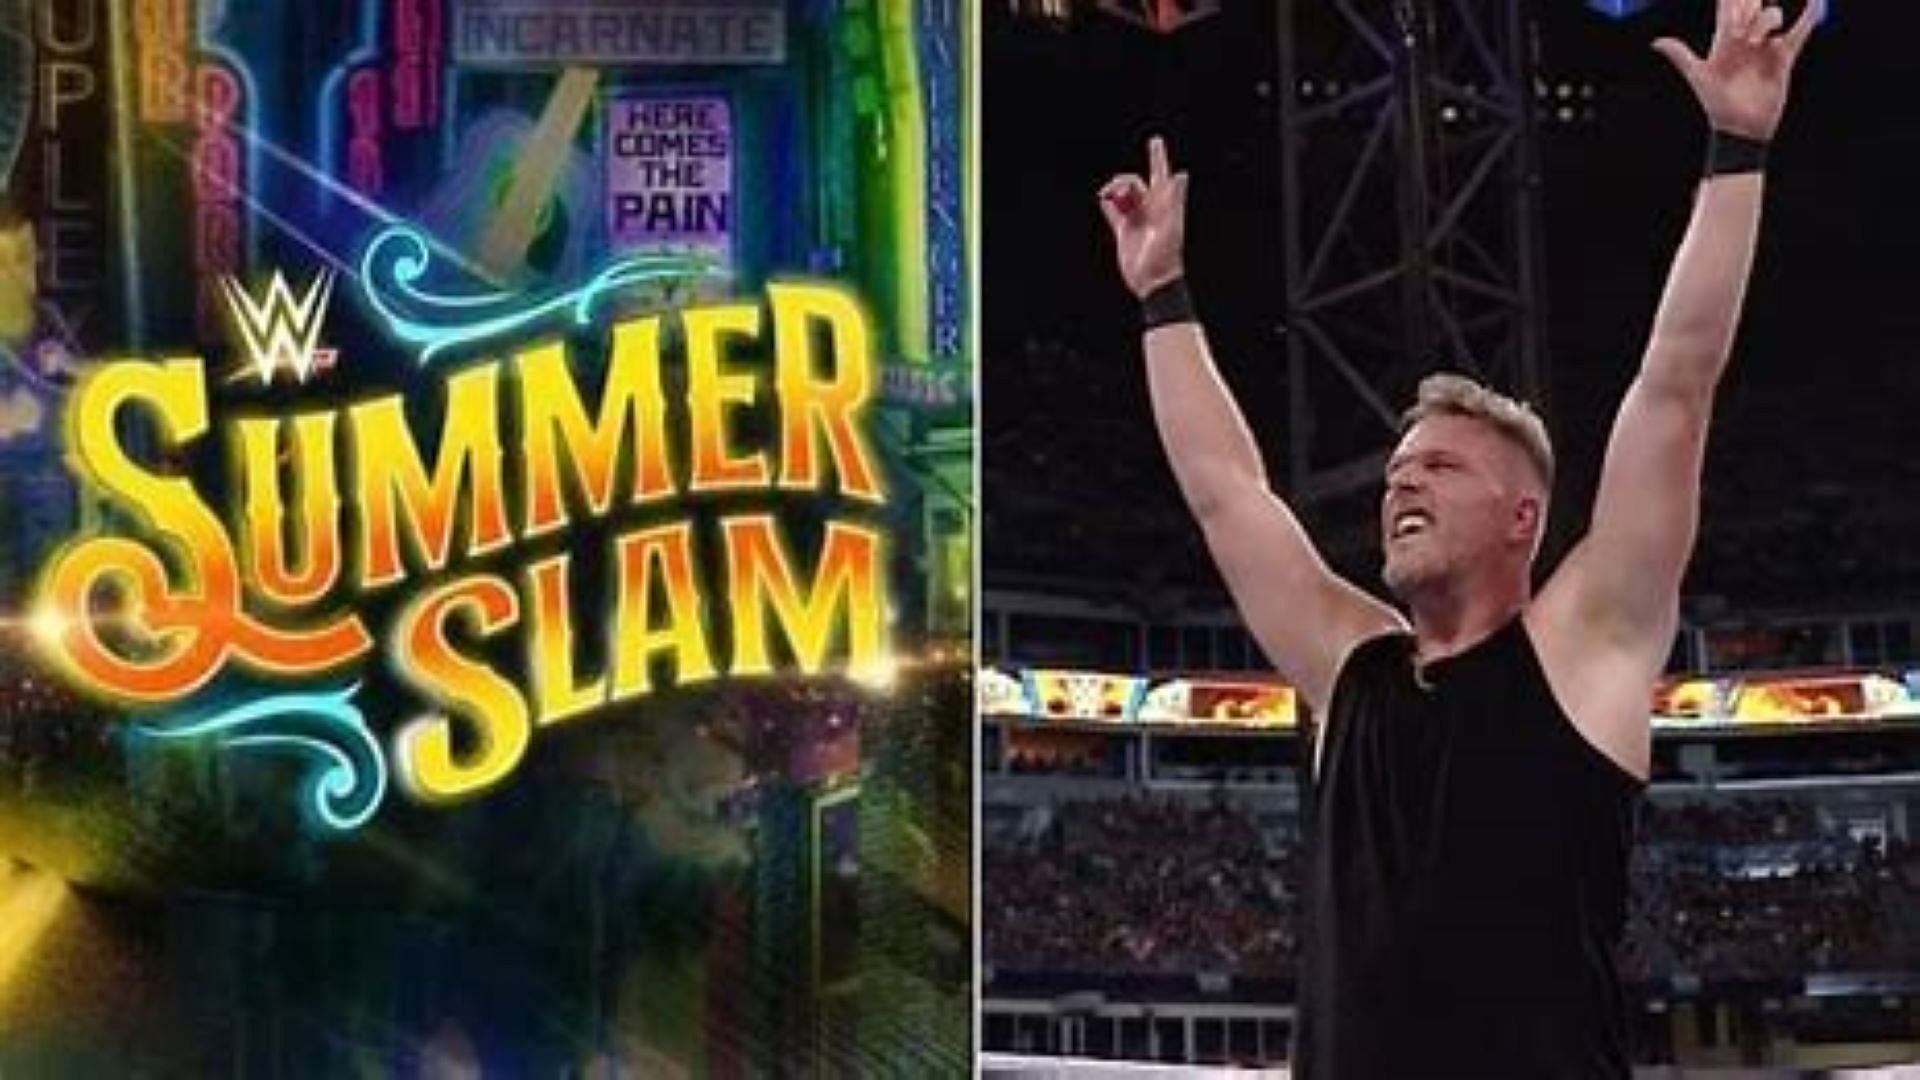 Former NFL kicker competes at WWE Summerslam.